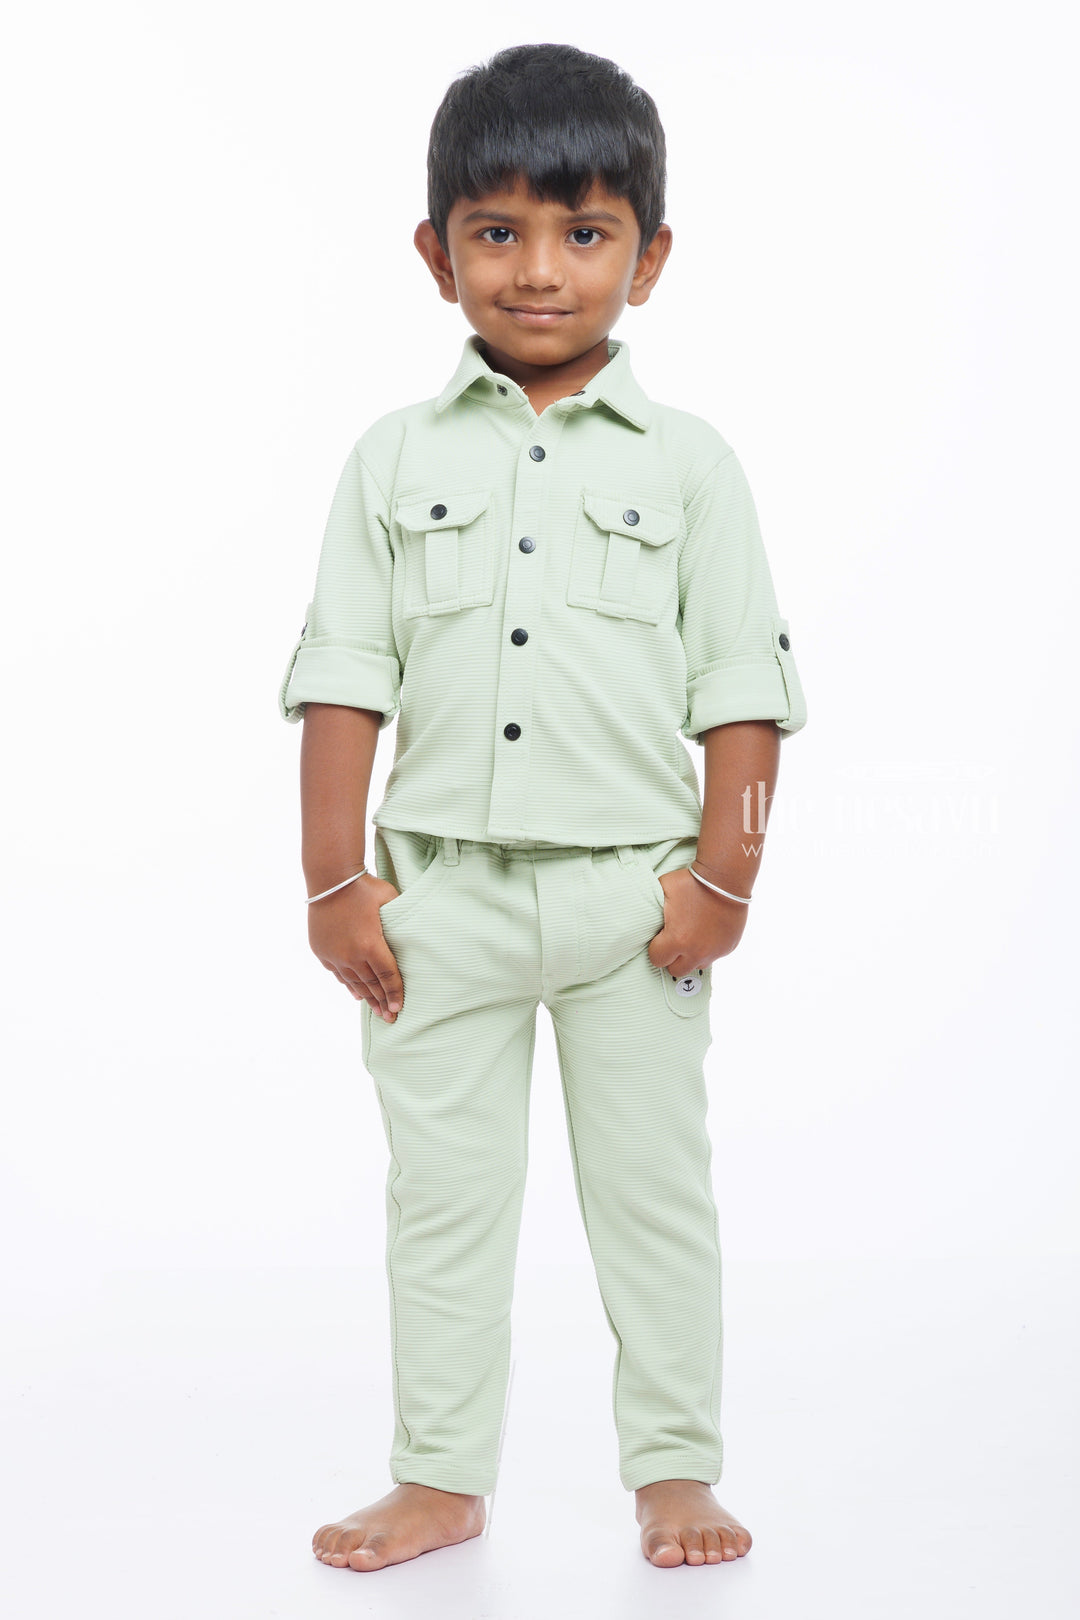 The Nesavu Boys Casual Set Boys Olive Green Shirt and Pant Casual Set - Fresh Style Nesavu 14 (6M) / Green / Knitted Lycra BES528B-14 Olive Green Boys Casual Set | Chic and Comfortable for Everyday Wear | The Nesavu